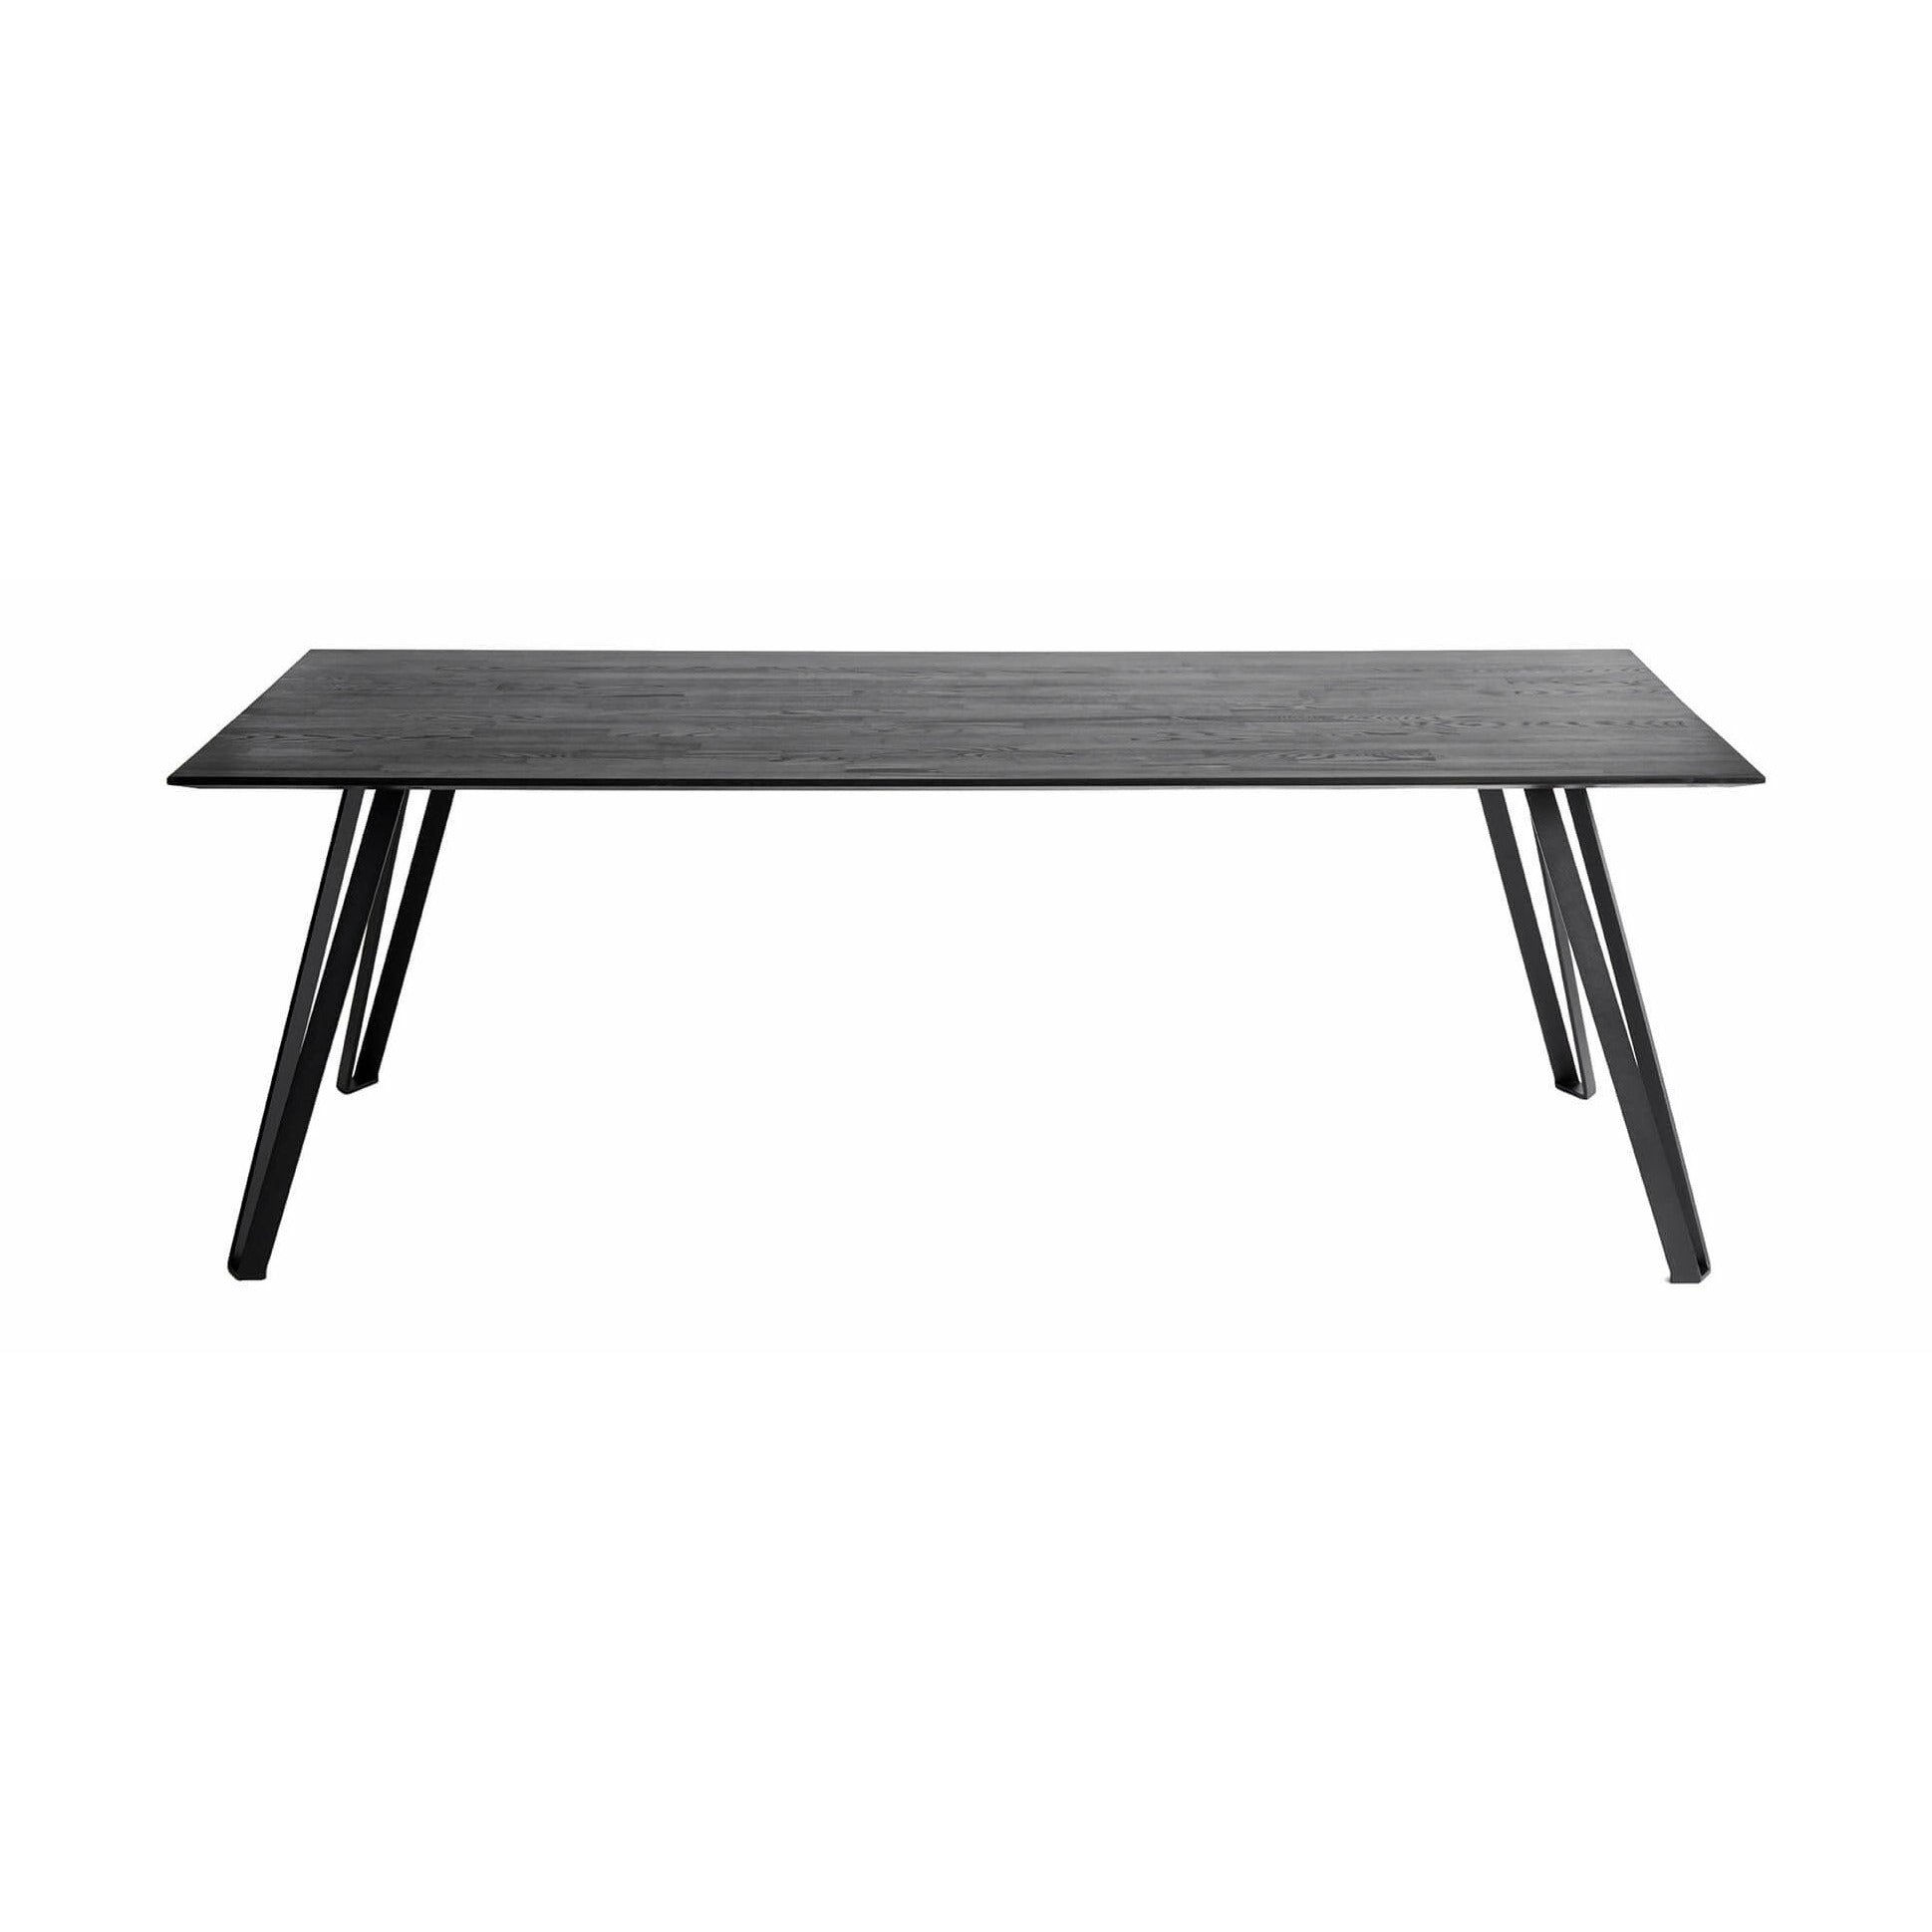 Muubs Space Dining Table Black, 220 cm